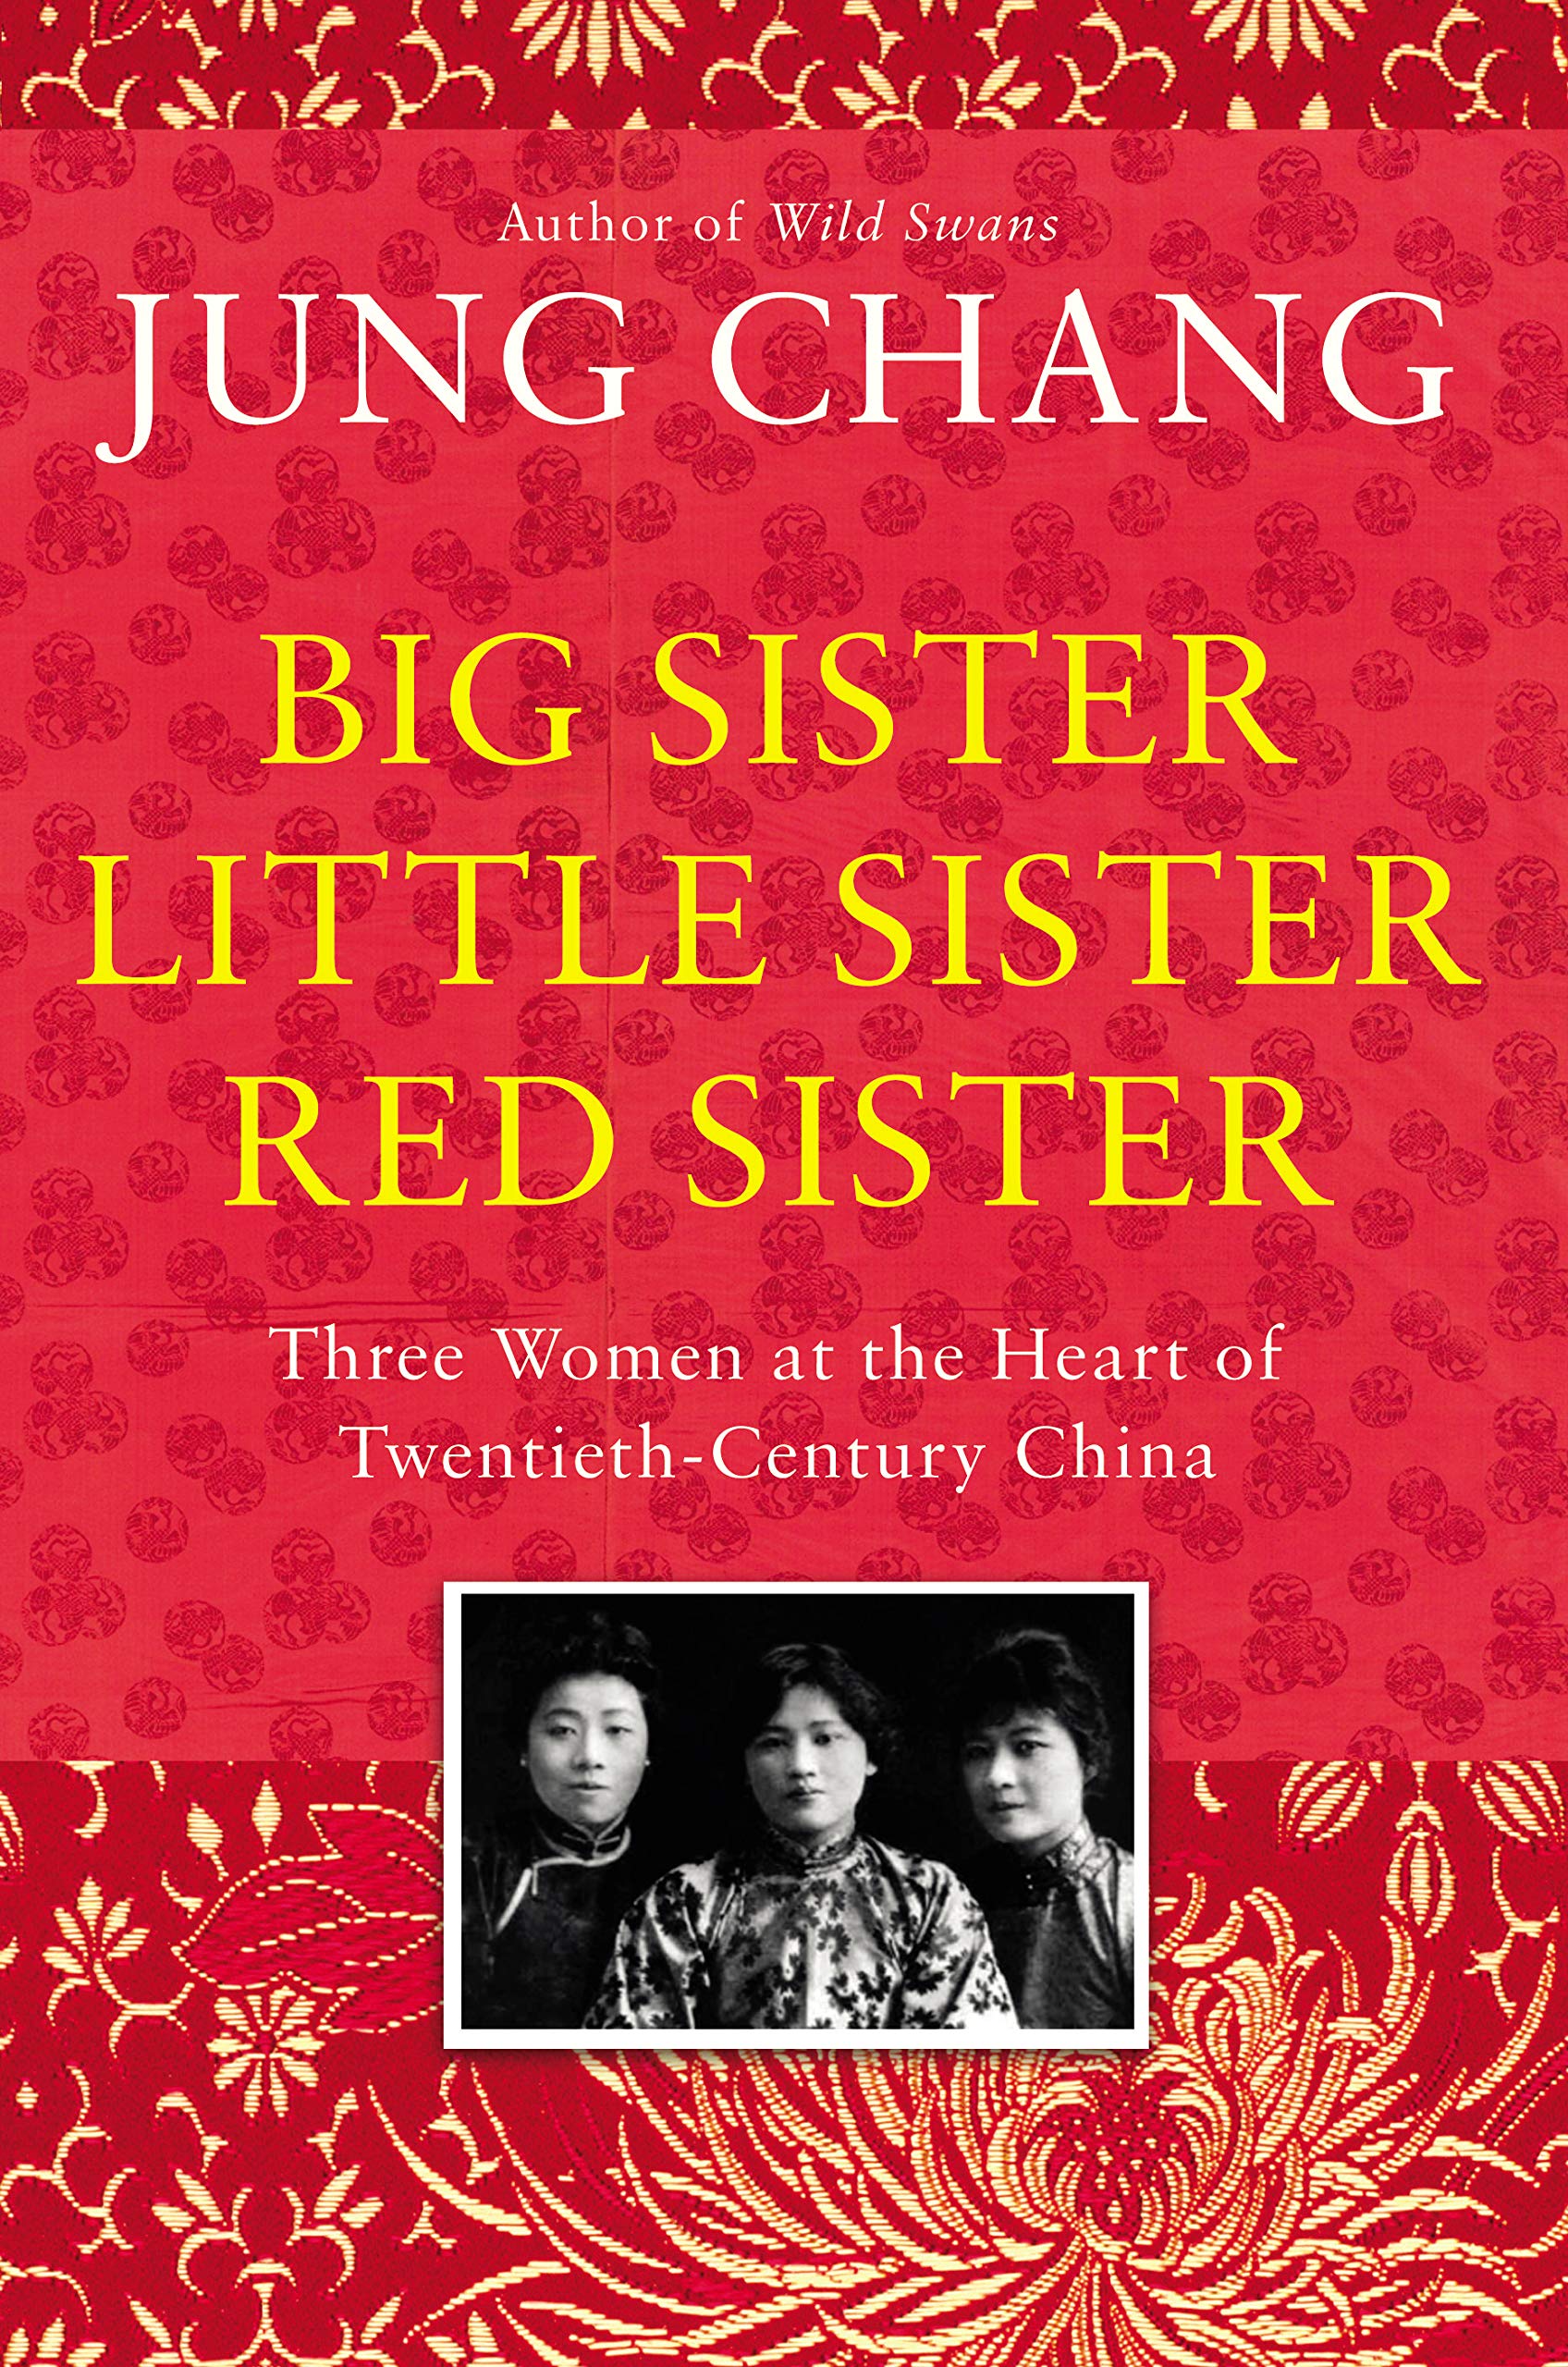 Cover of "Big Sister, Little Sister, Red Sister" by Jung Chang